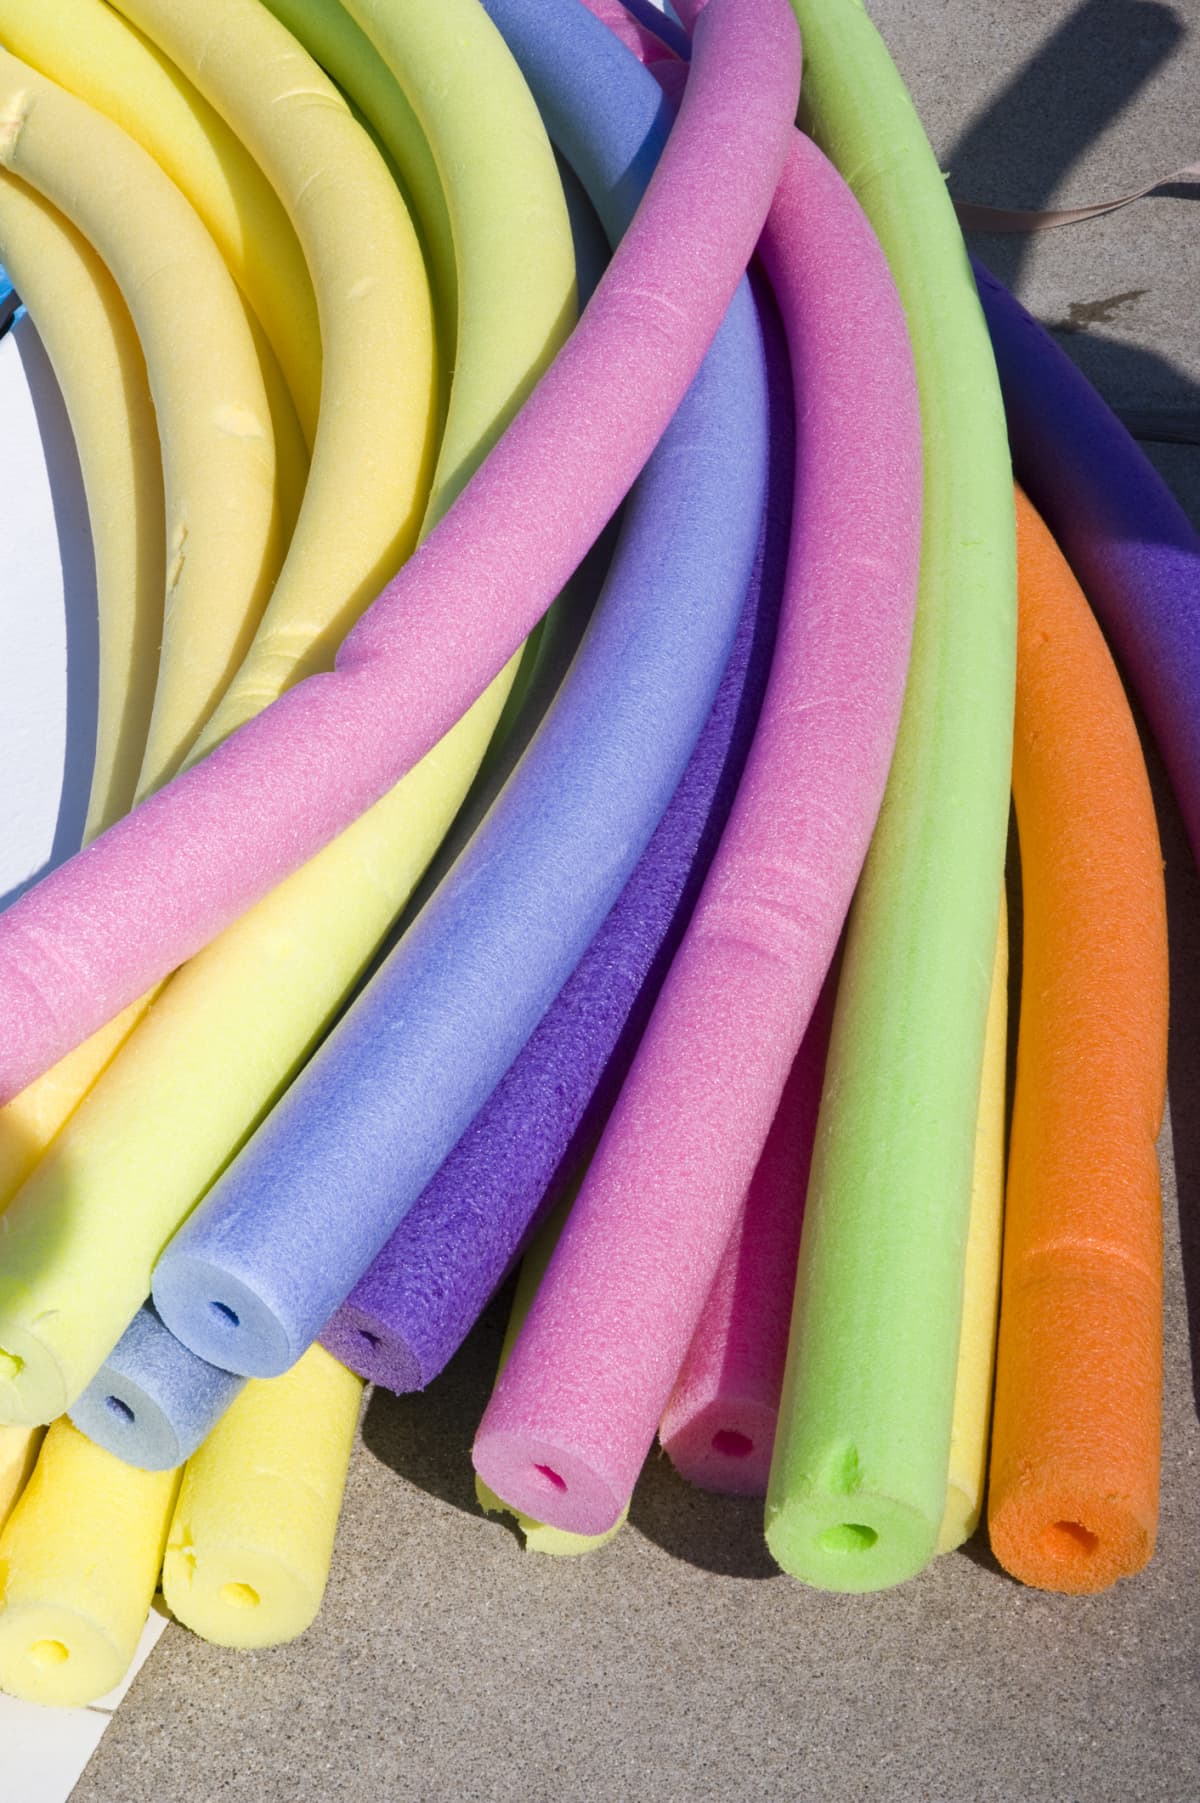 Multicolored swimming pool noodles.